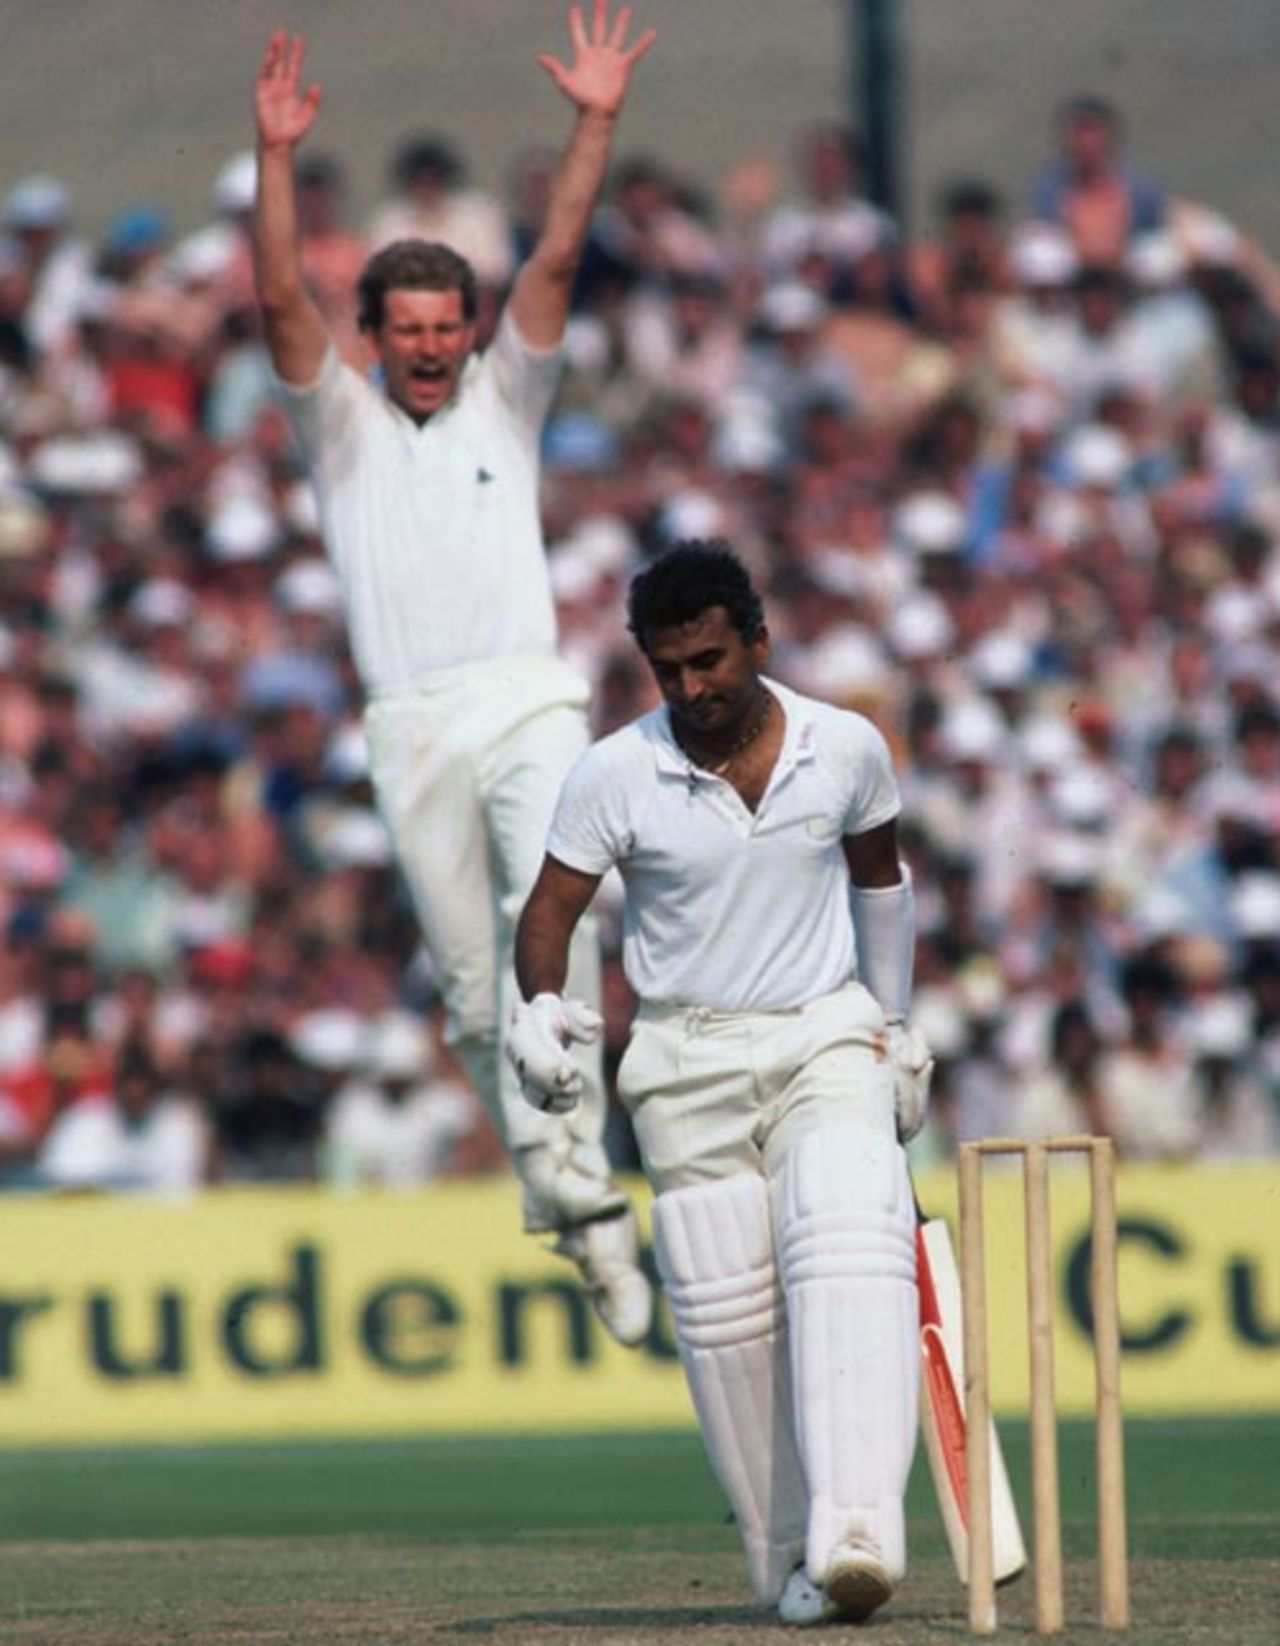 Sunil Gavaskar's disappointing tournament continued as he was caught behind off Paul Allot for 25, World Cup 1st semi-final, England v India, Old Trafford, June 22, 1983